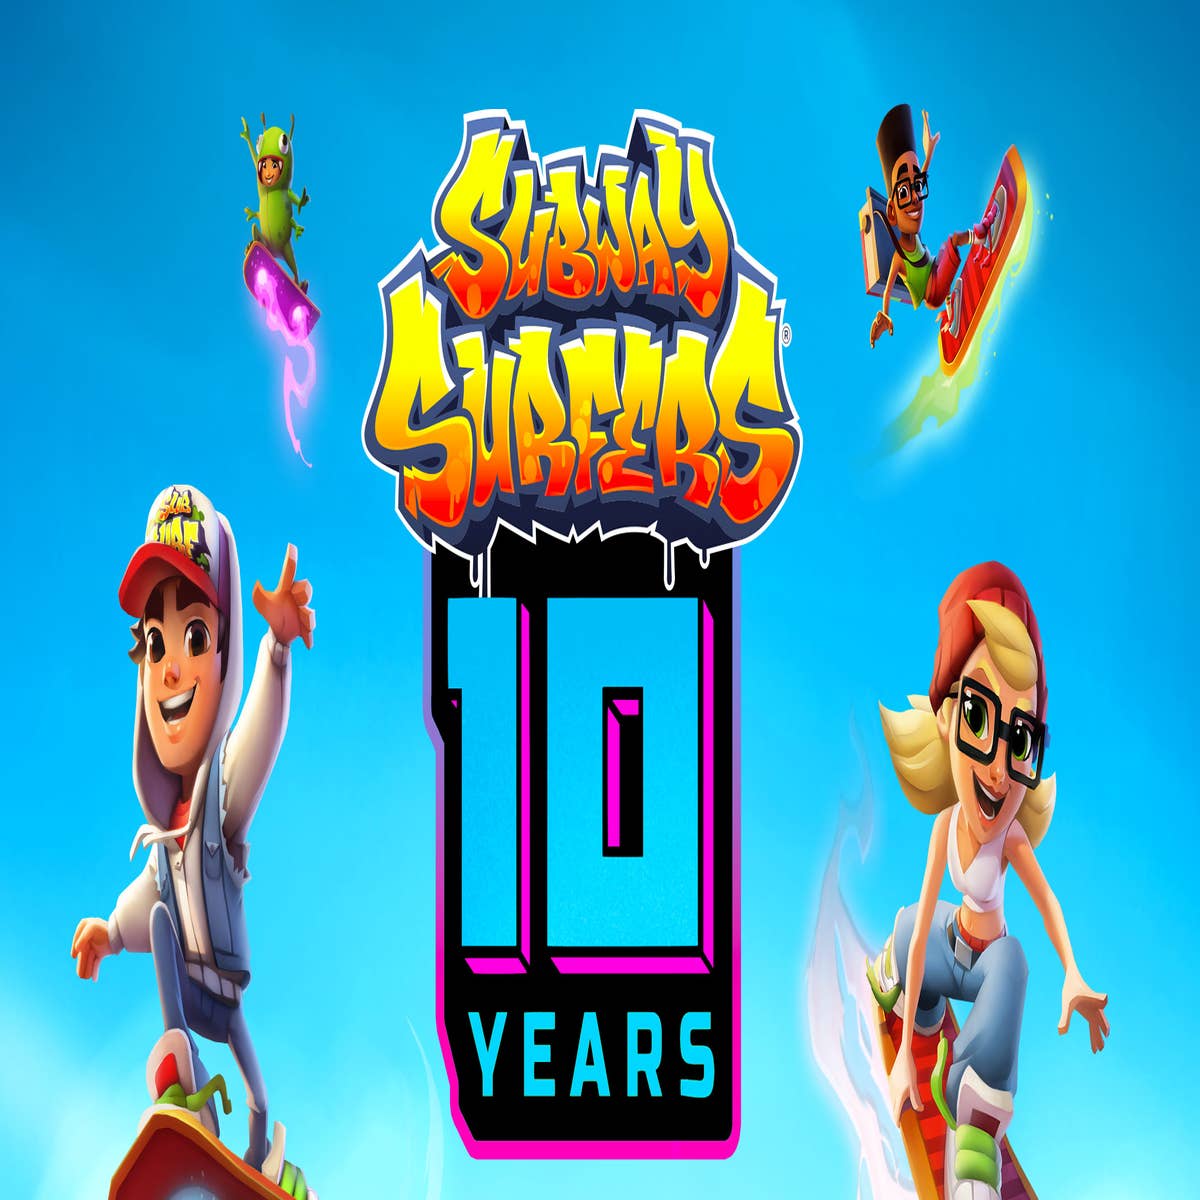 Subway Surfers takes the endless runner into the real world to celebrate  its 11th anniversary